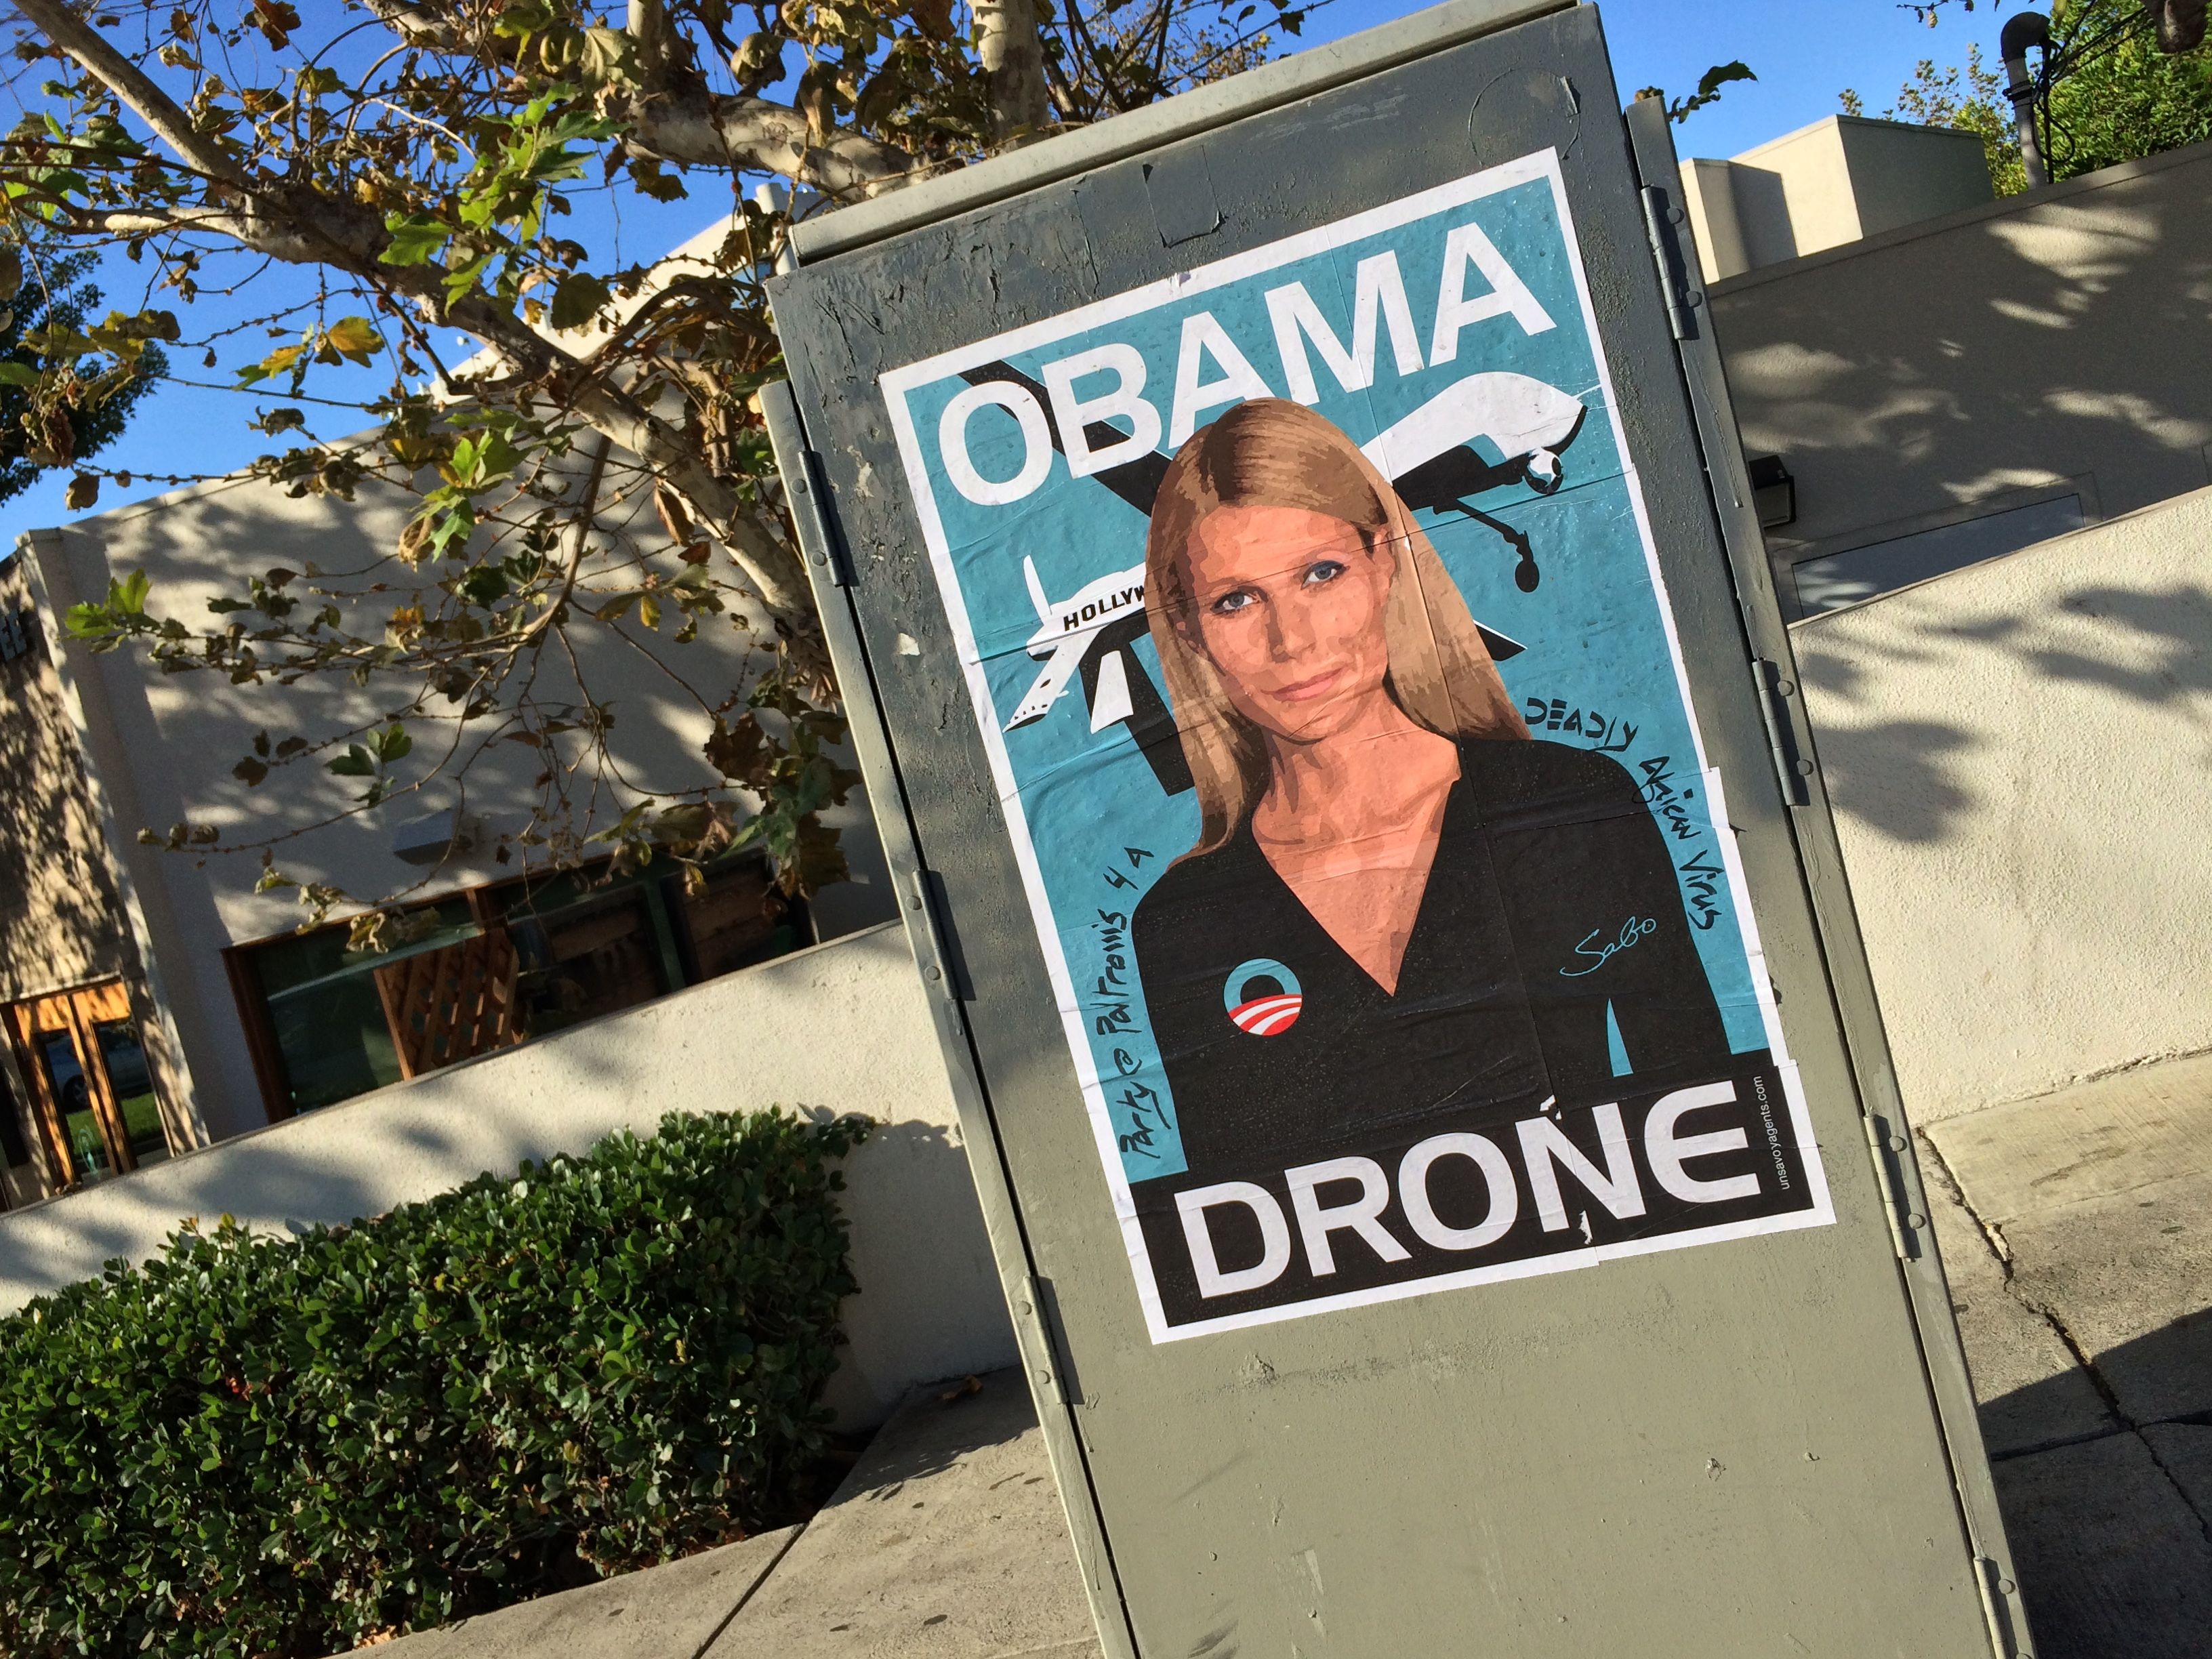 Gwyneth Paltrow Obama Drone posters poster Sabo President Obama DNC fundraiser L.A. Los Angeles Brentwood neighborhood neighbor neighbors hang hanging hung signs plaster plastering plastered traffic signal box boxes lamp posts bus benches anonymous conservative street artist provocative controversial subversive Unsavory Agents UnsavoryAgents outside political Democrats Democrat drones Predator plane planes flying background actor actress home house host hosting gala